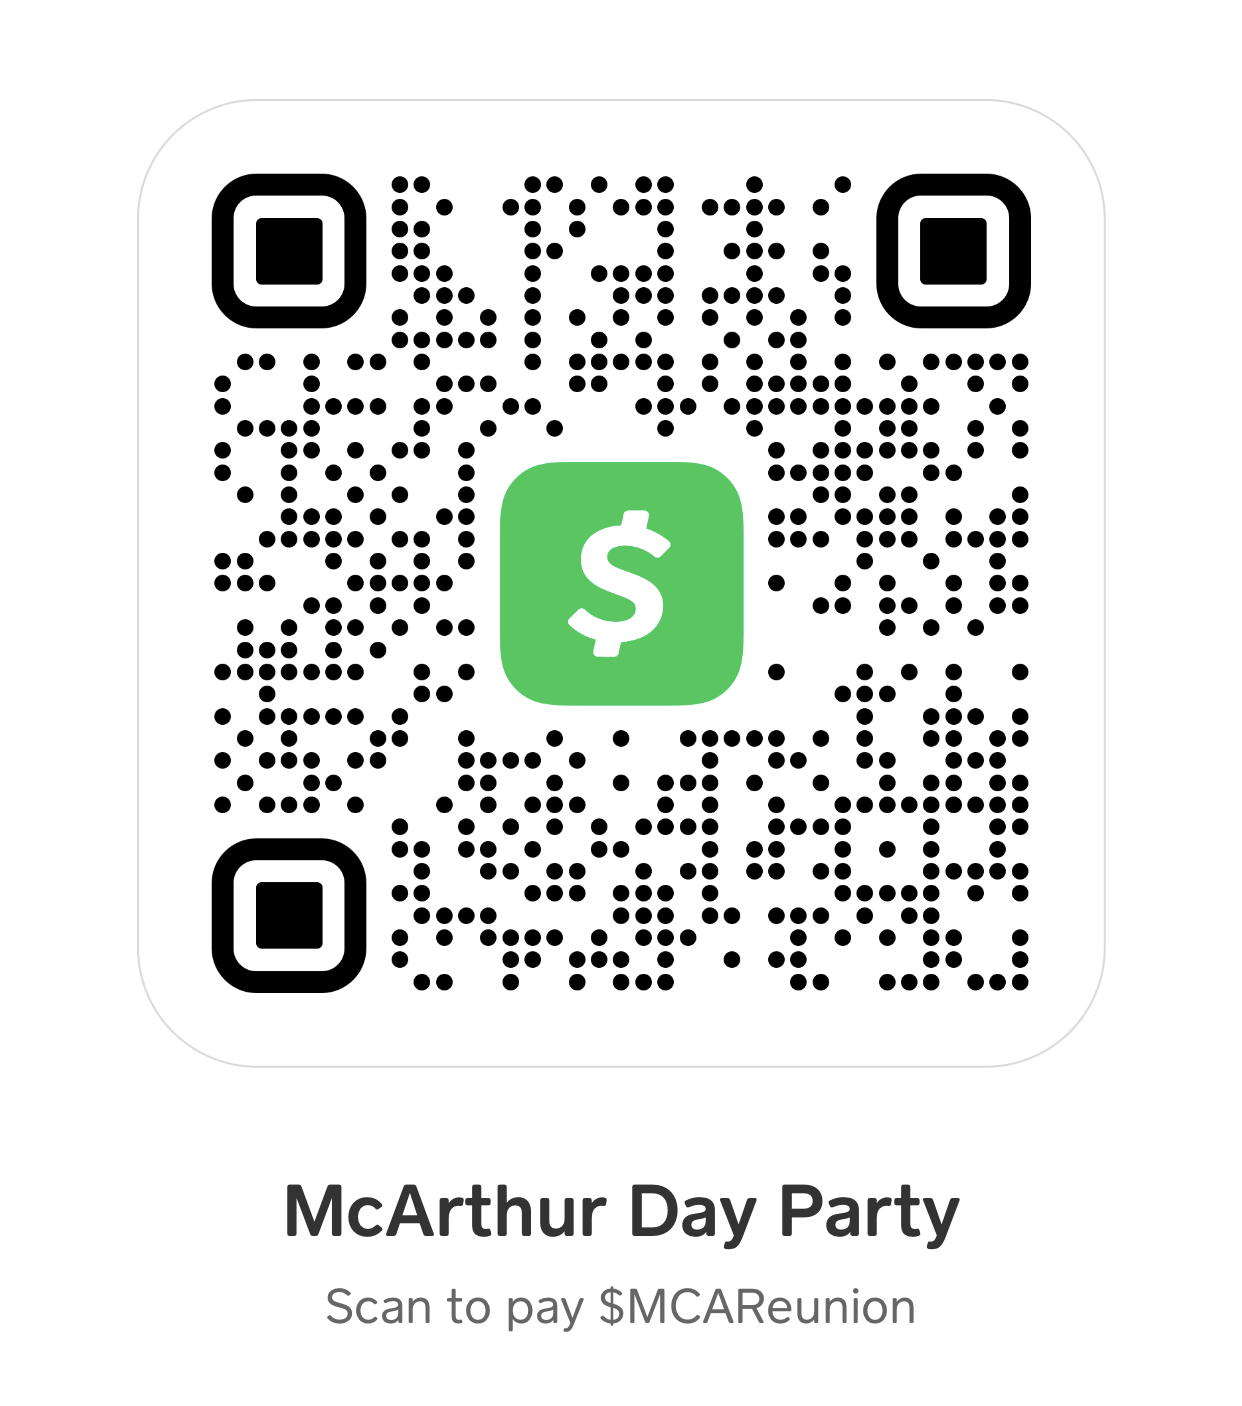 MCARTHUR DAY PARTY